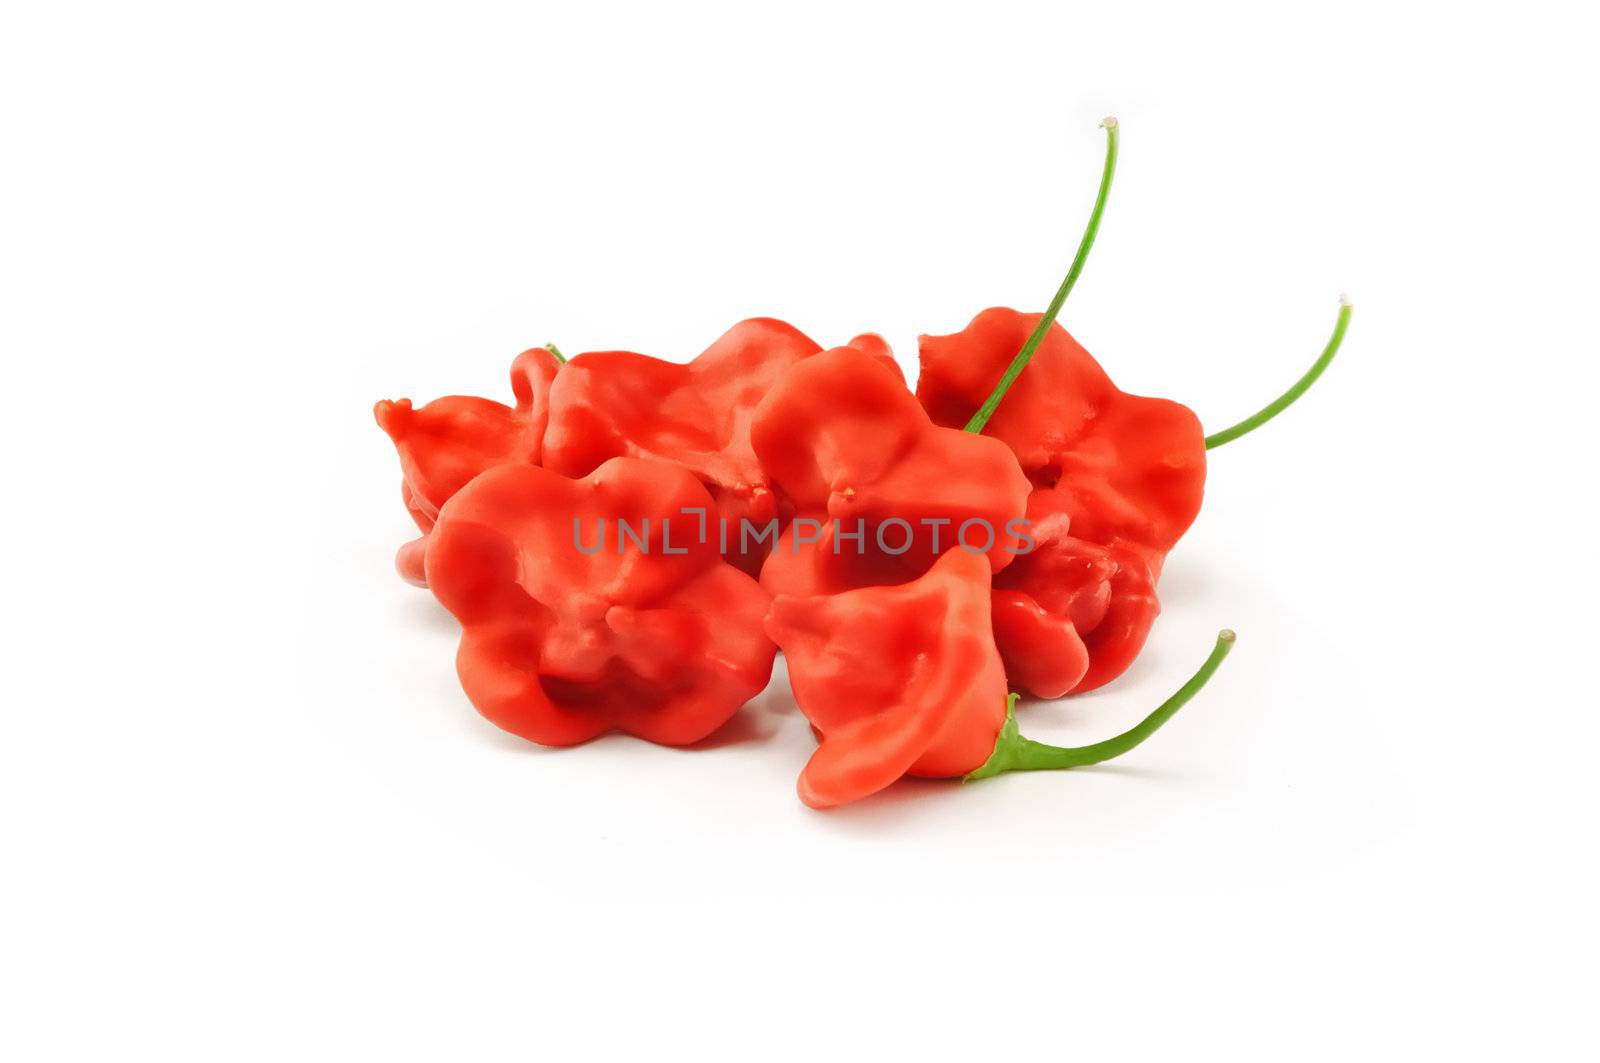 Red hot pepper by Apolonia